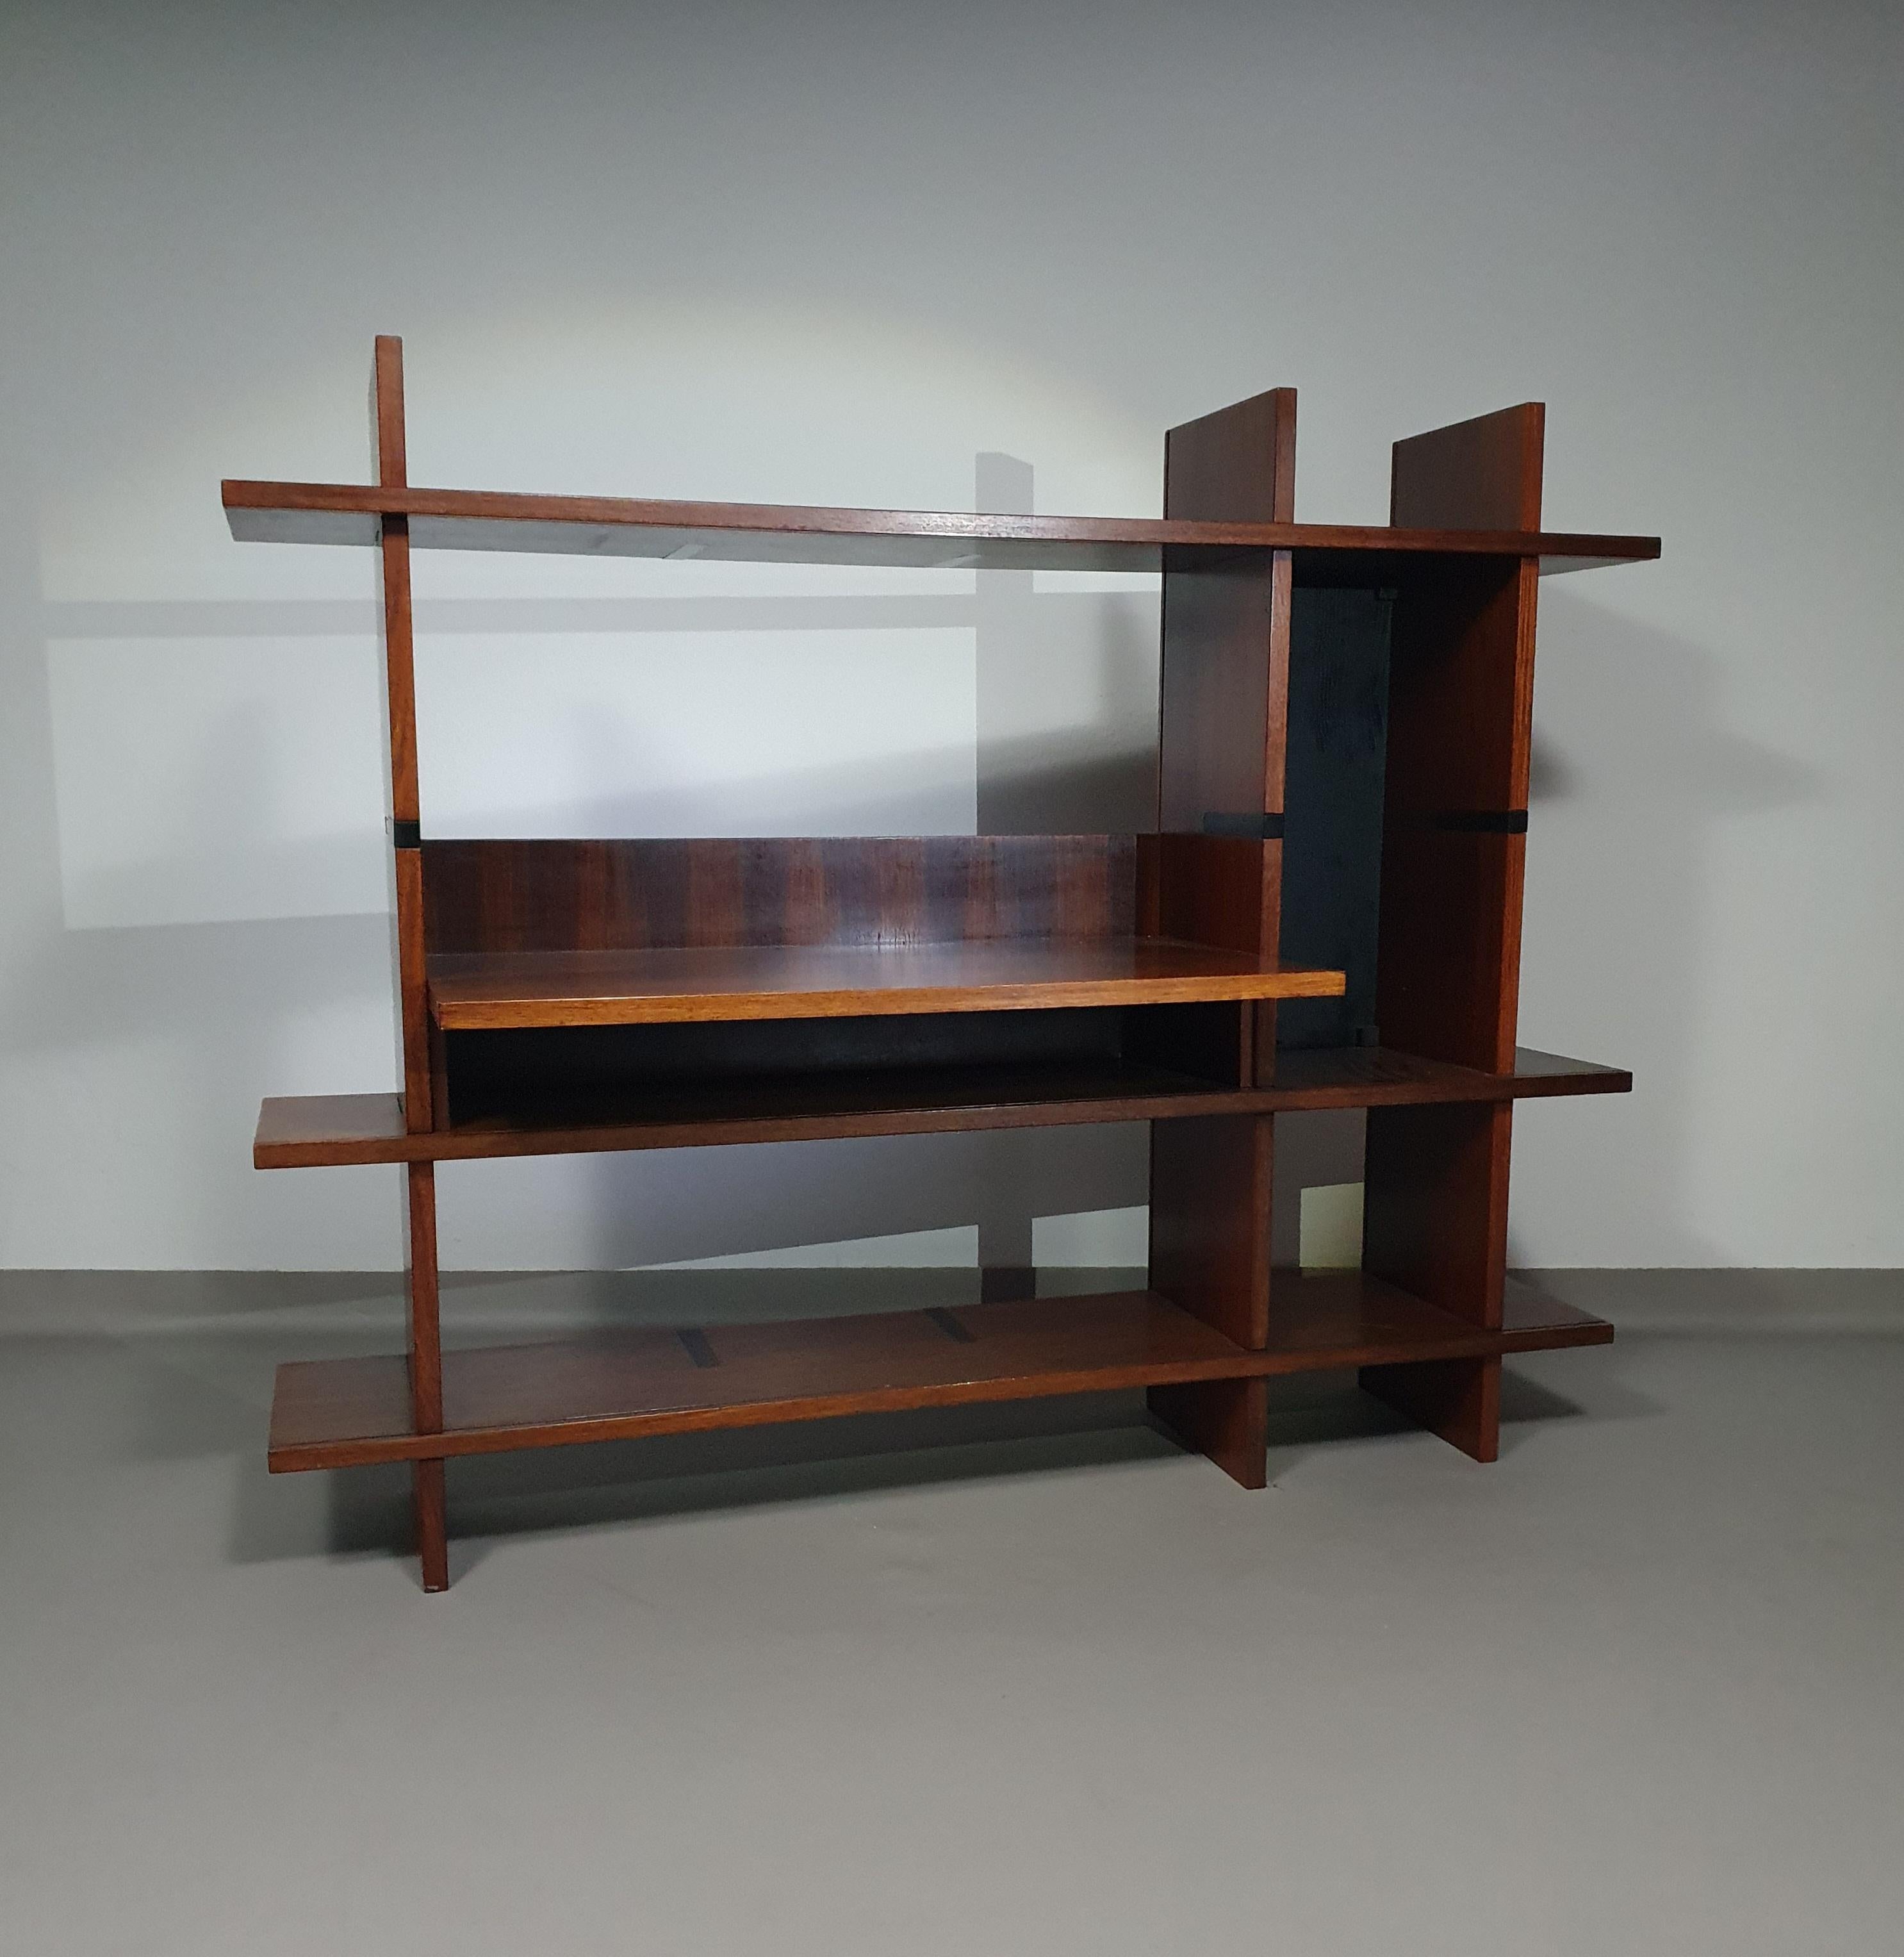 E101 Domino bookcase with writing desk by Eugenio Gerli for Tecno 1960
In top condition. Marked piece TECNO

Width 180
Height 145
Depth 36
Writing desk 105 x 57 cm